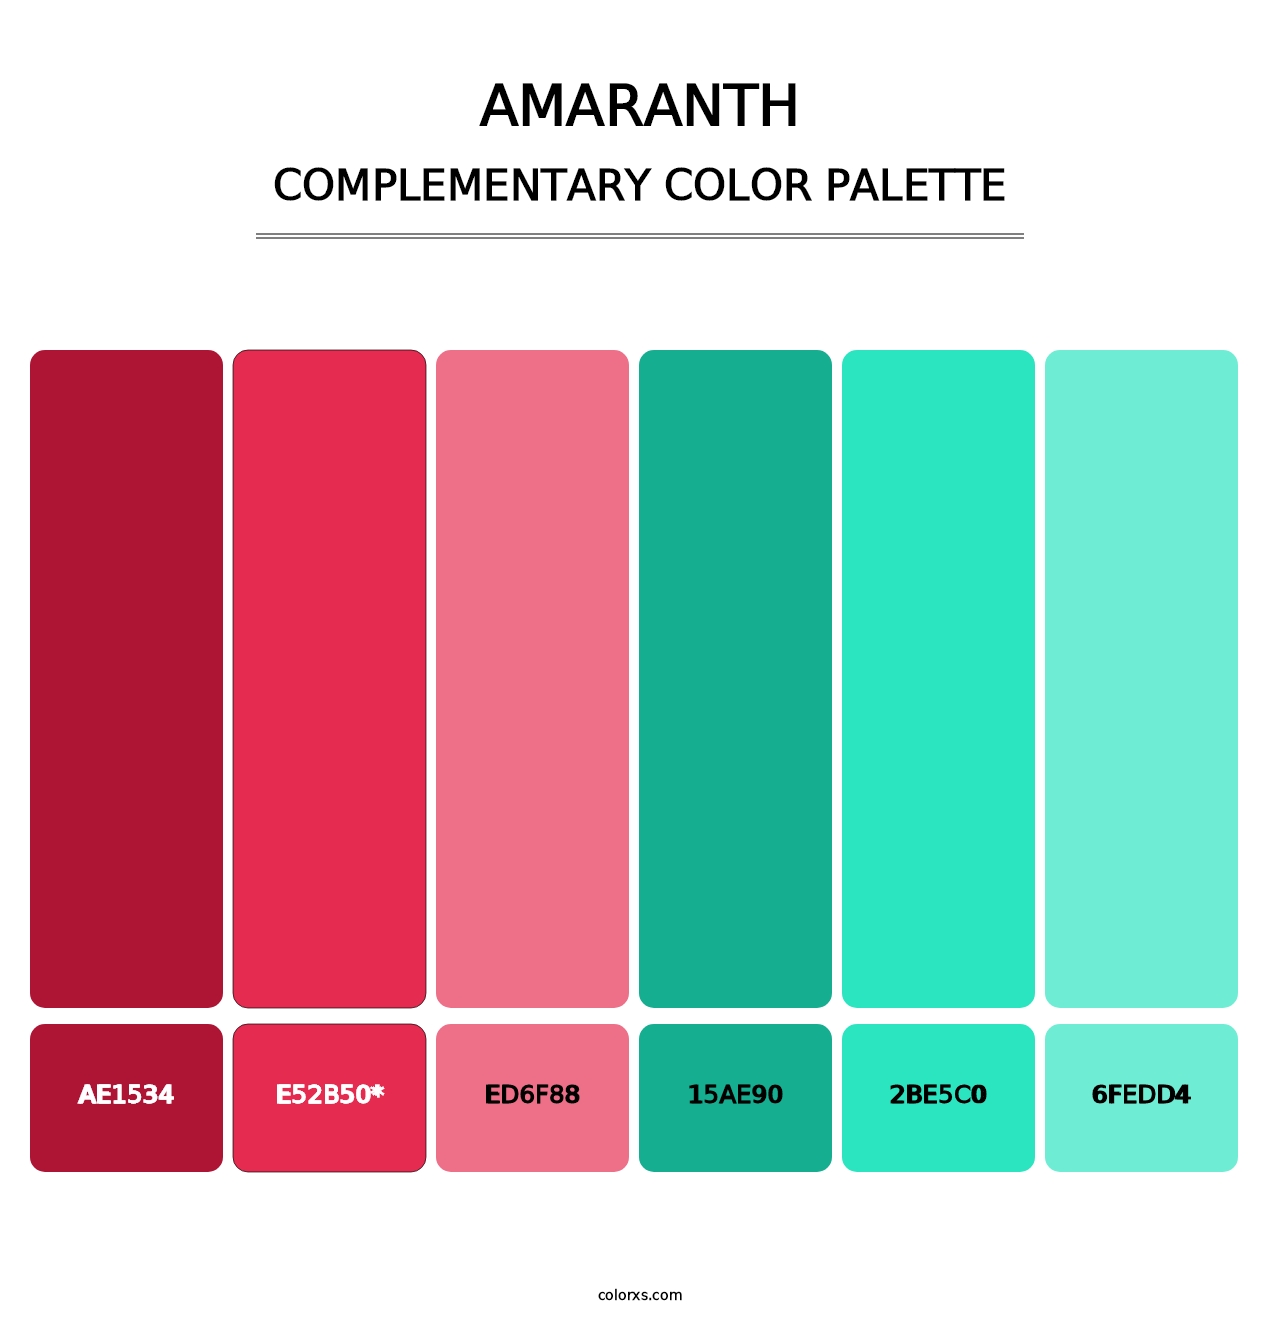 Amaranth - Complementary Color Palette